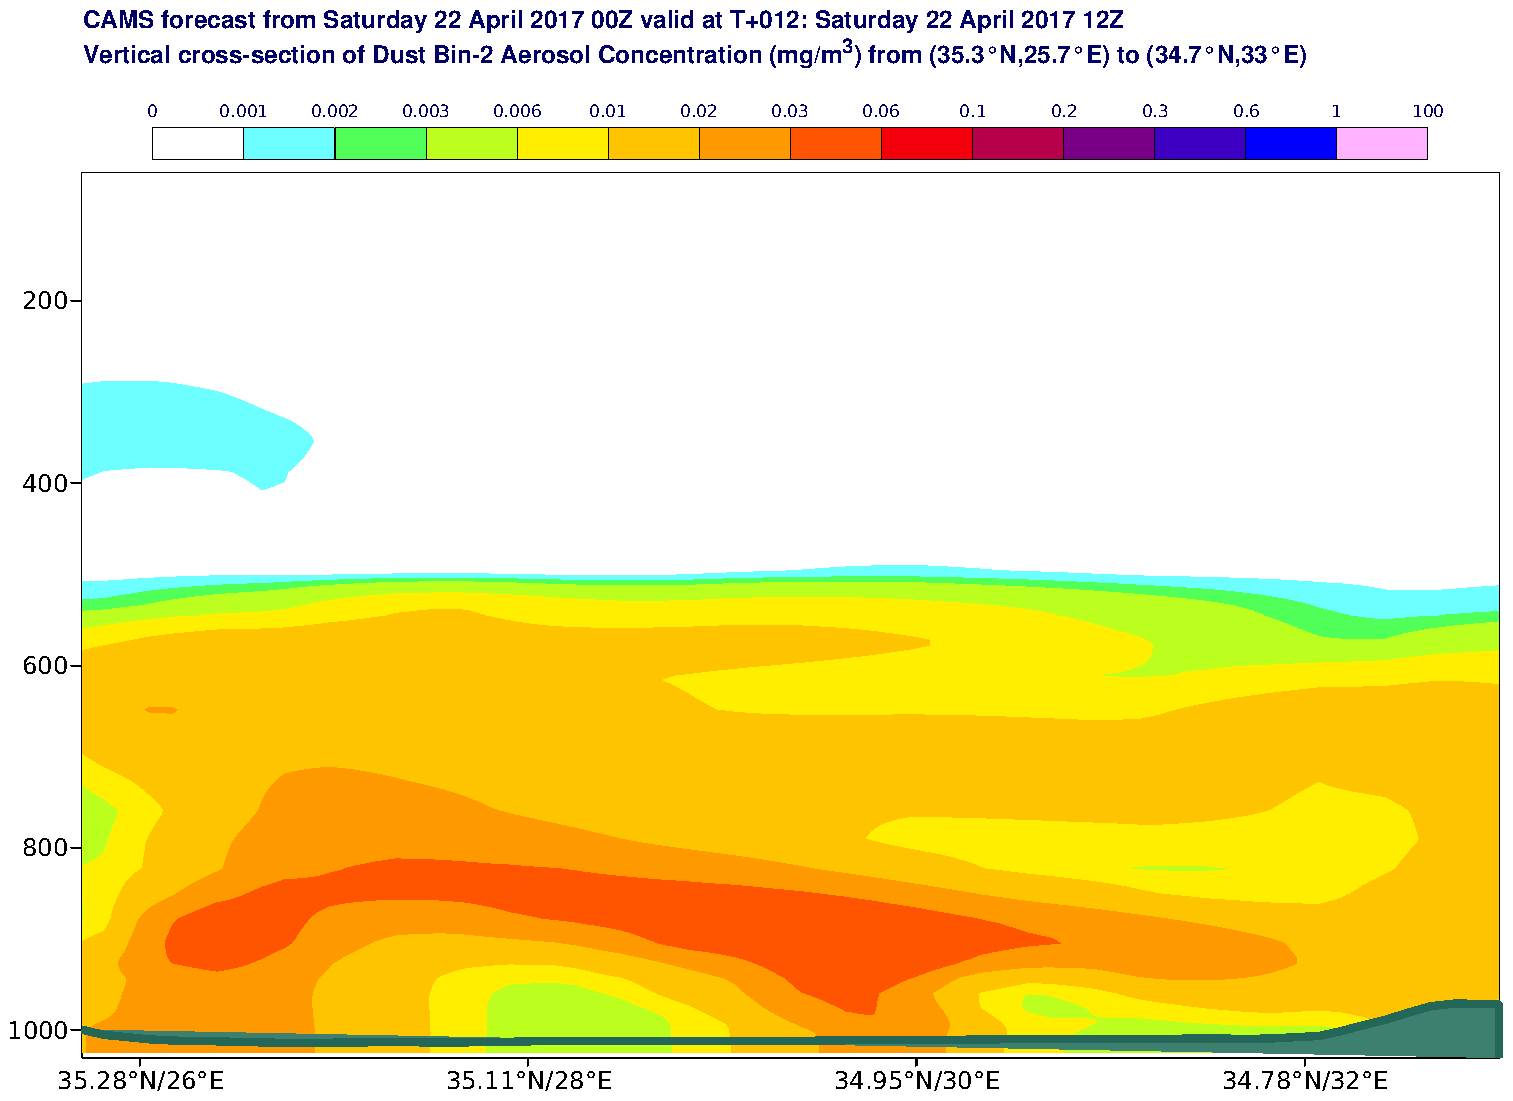 Vertical cross-section of Dust Bin-2 Aerosol Concentration (mg/m3) valid at T12 - 2017-04-22 12:00